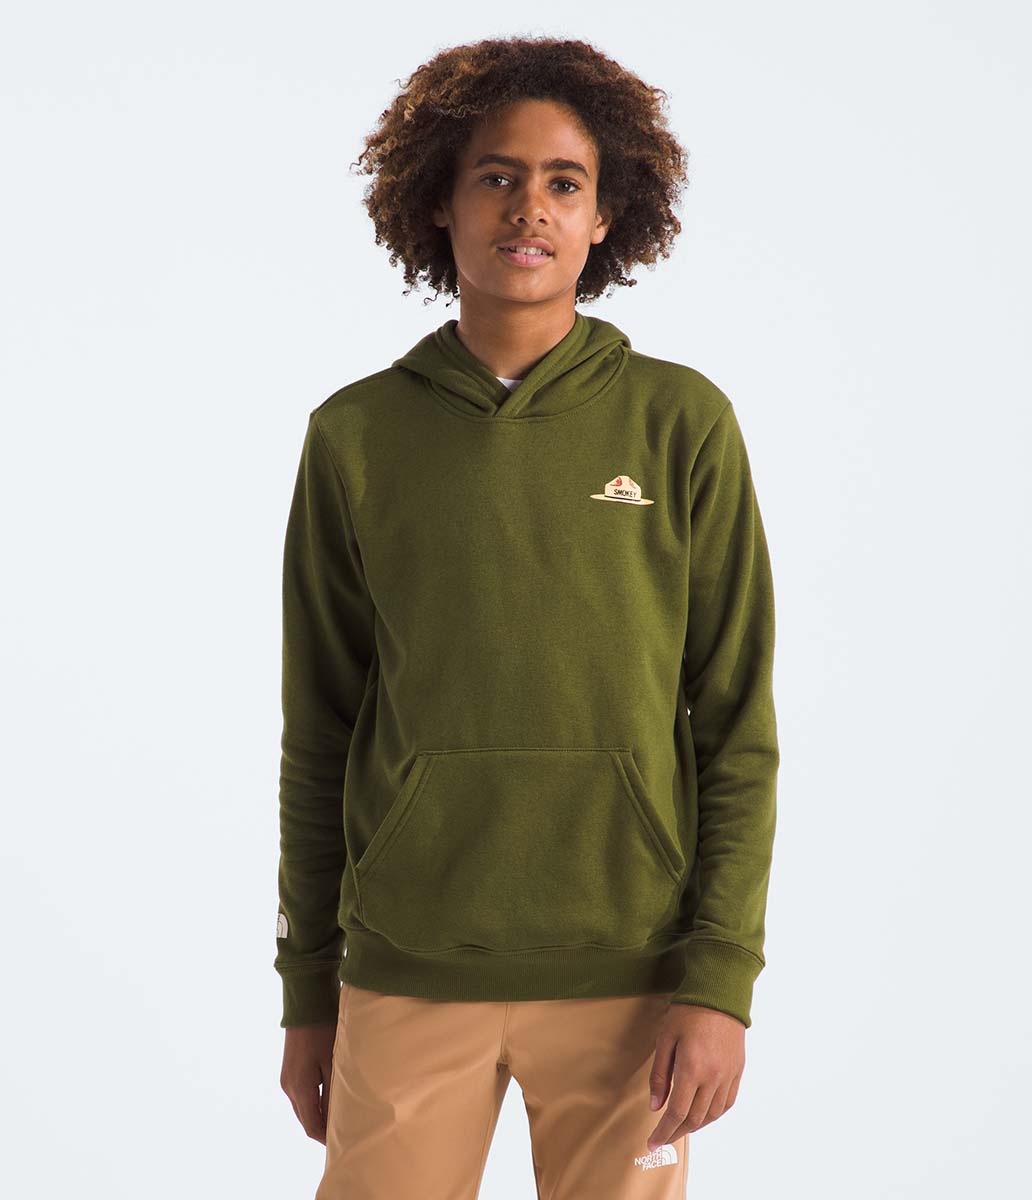 The North Face Boys' Camp Fleece Pullover Hoodie